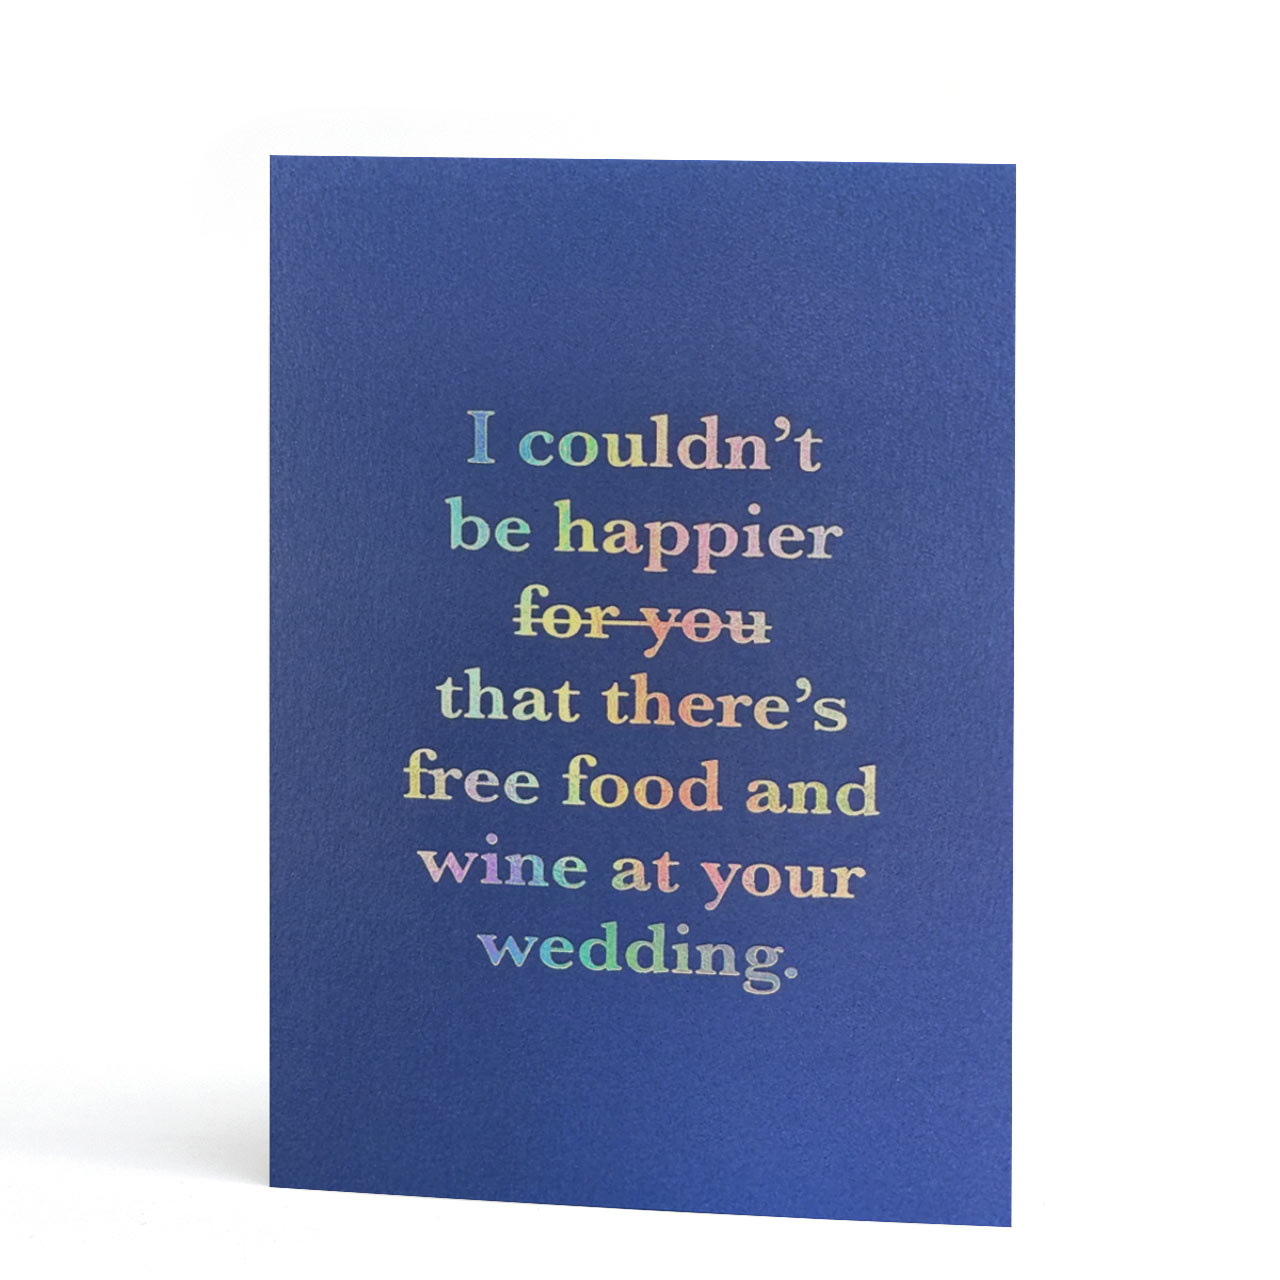 Free Food at Your Wedding Rainbow Foil Greeting Card